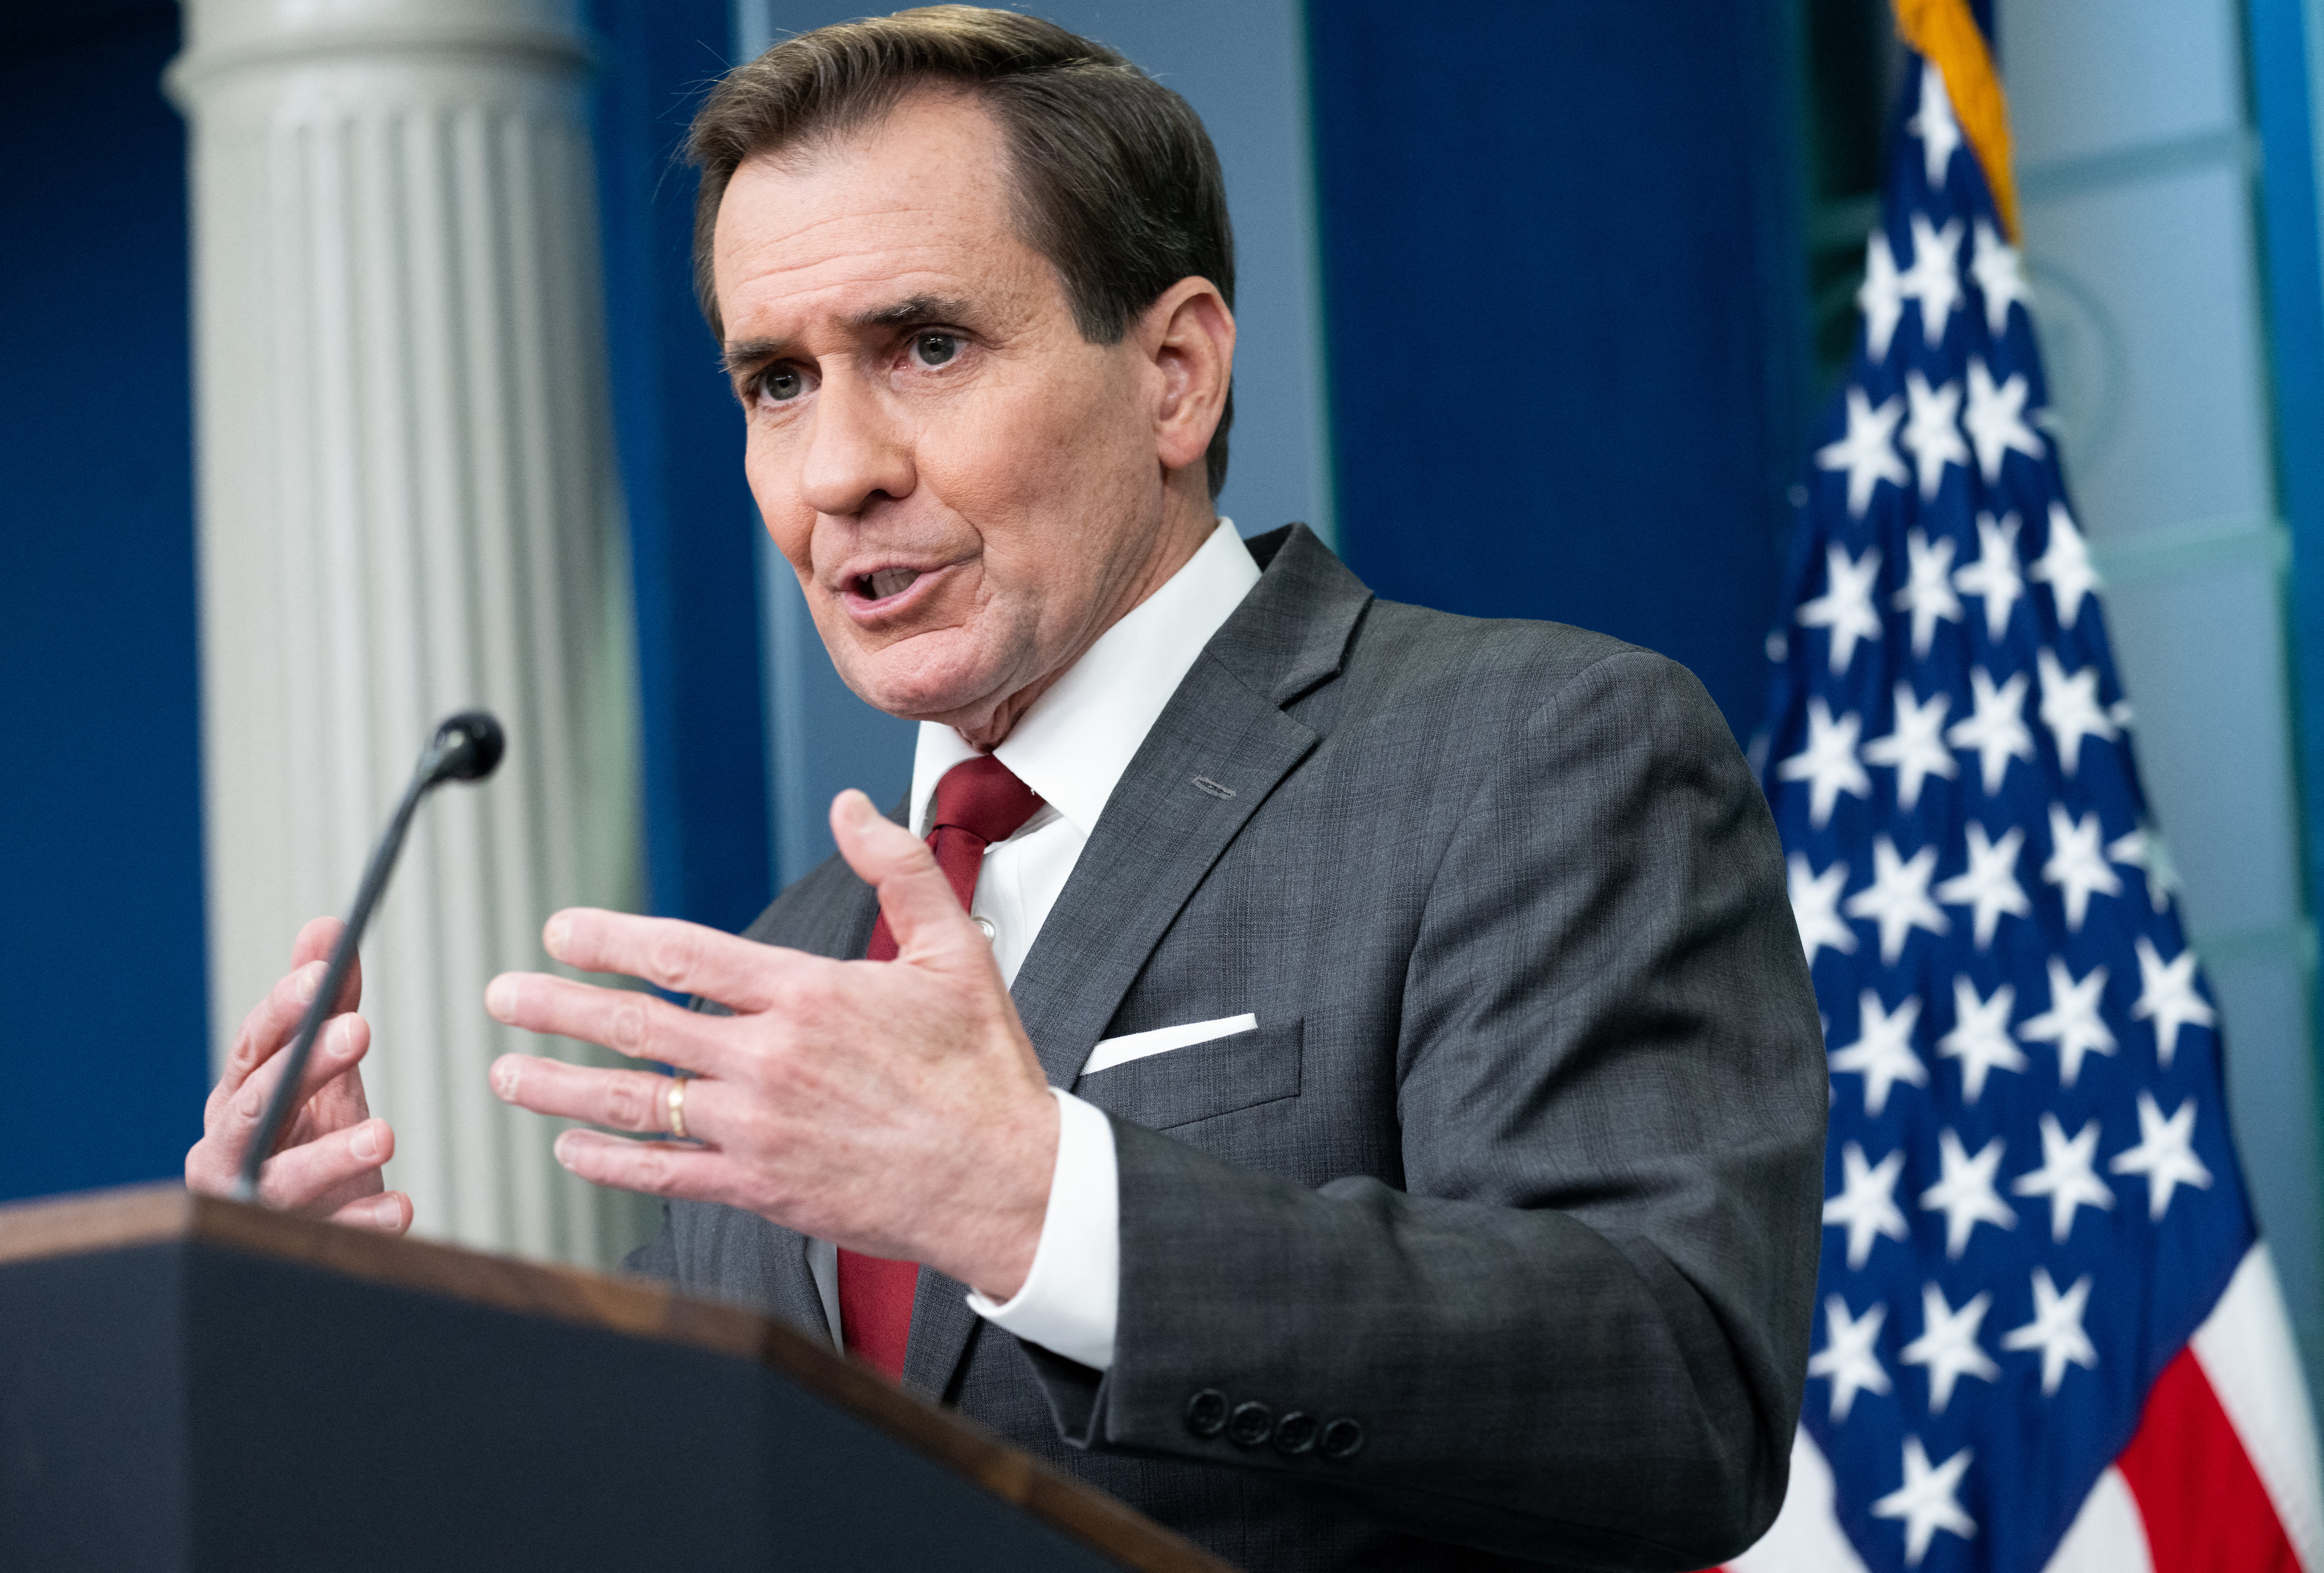 National Security Council spokesperson John Kirby speaks during a press briefing at the White House in Washington, DC, on January 24.